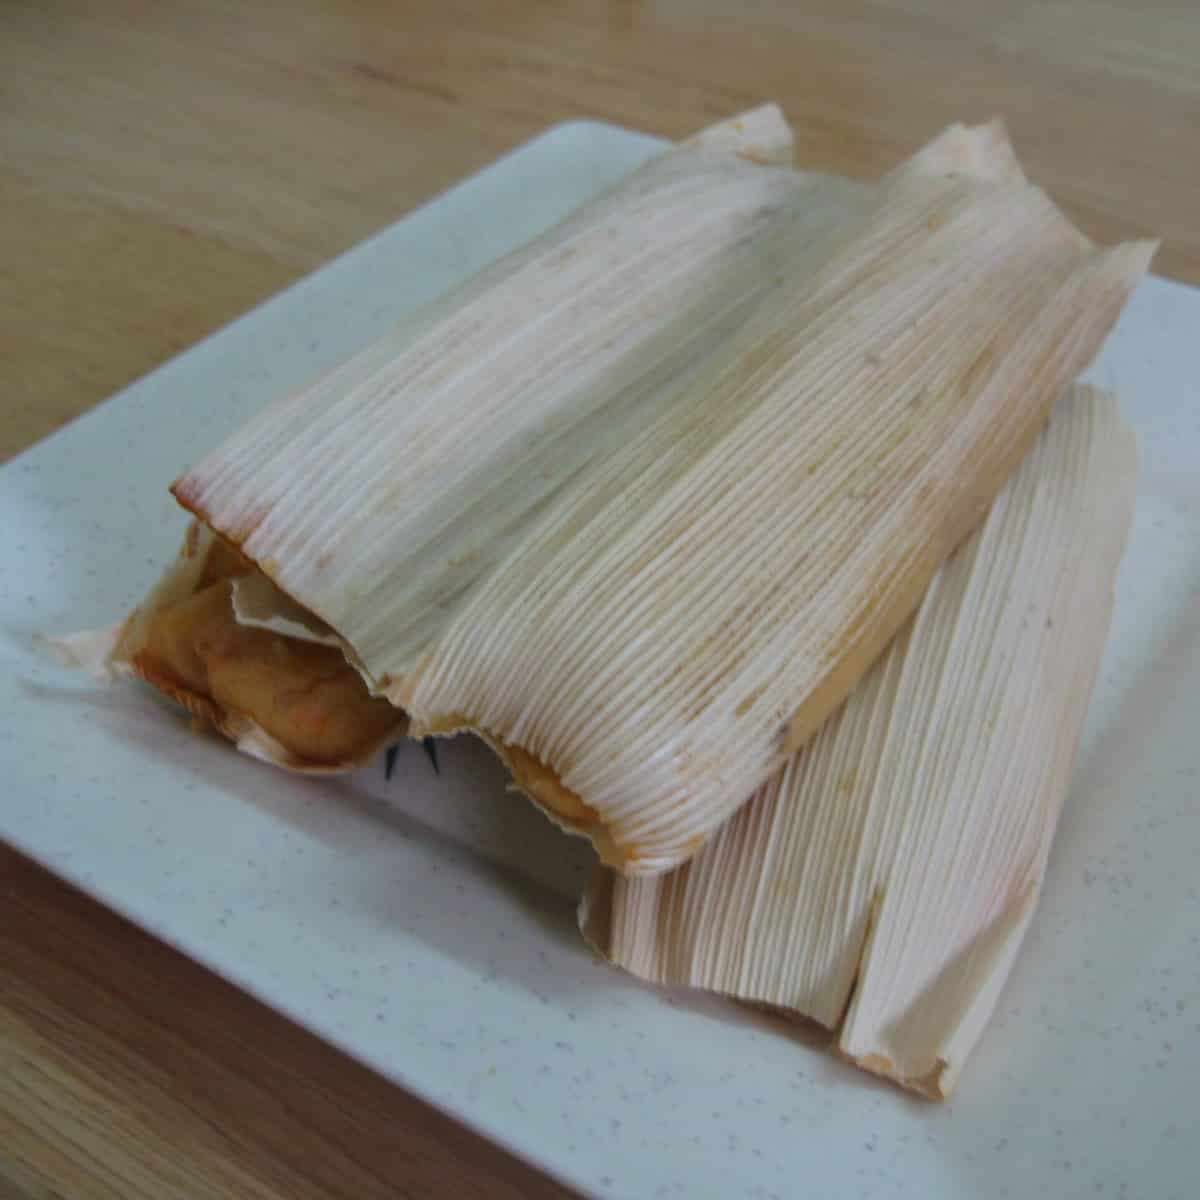  Don't be fooled by their size - these tamales are mighty tasty.